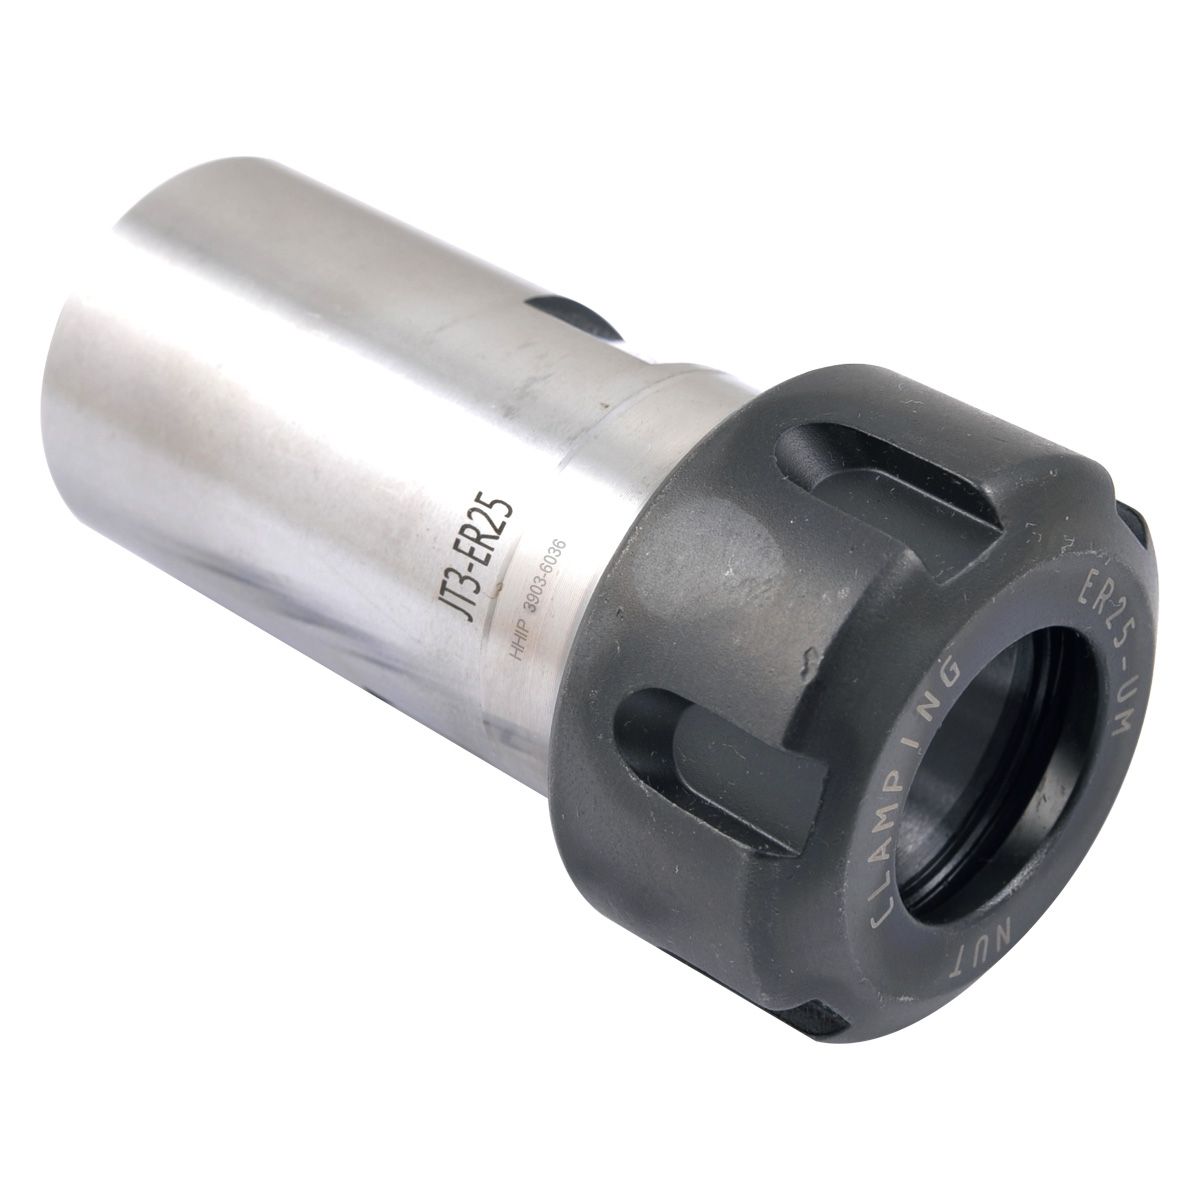 ER25 COLLET & DRILL CHUCK WITH JT3 SLEEVE (3903-6036)